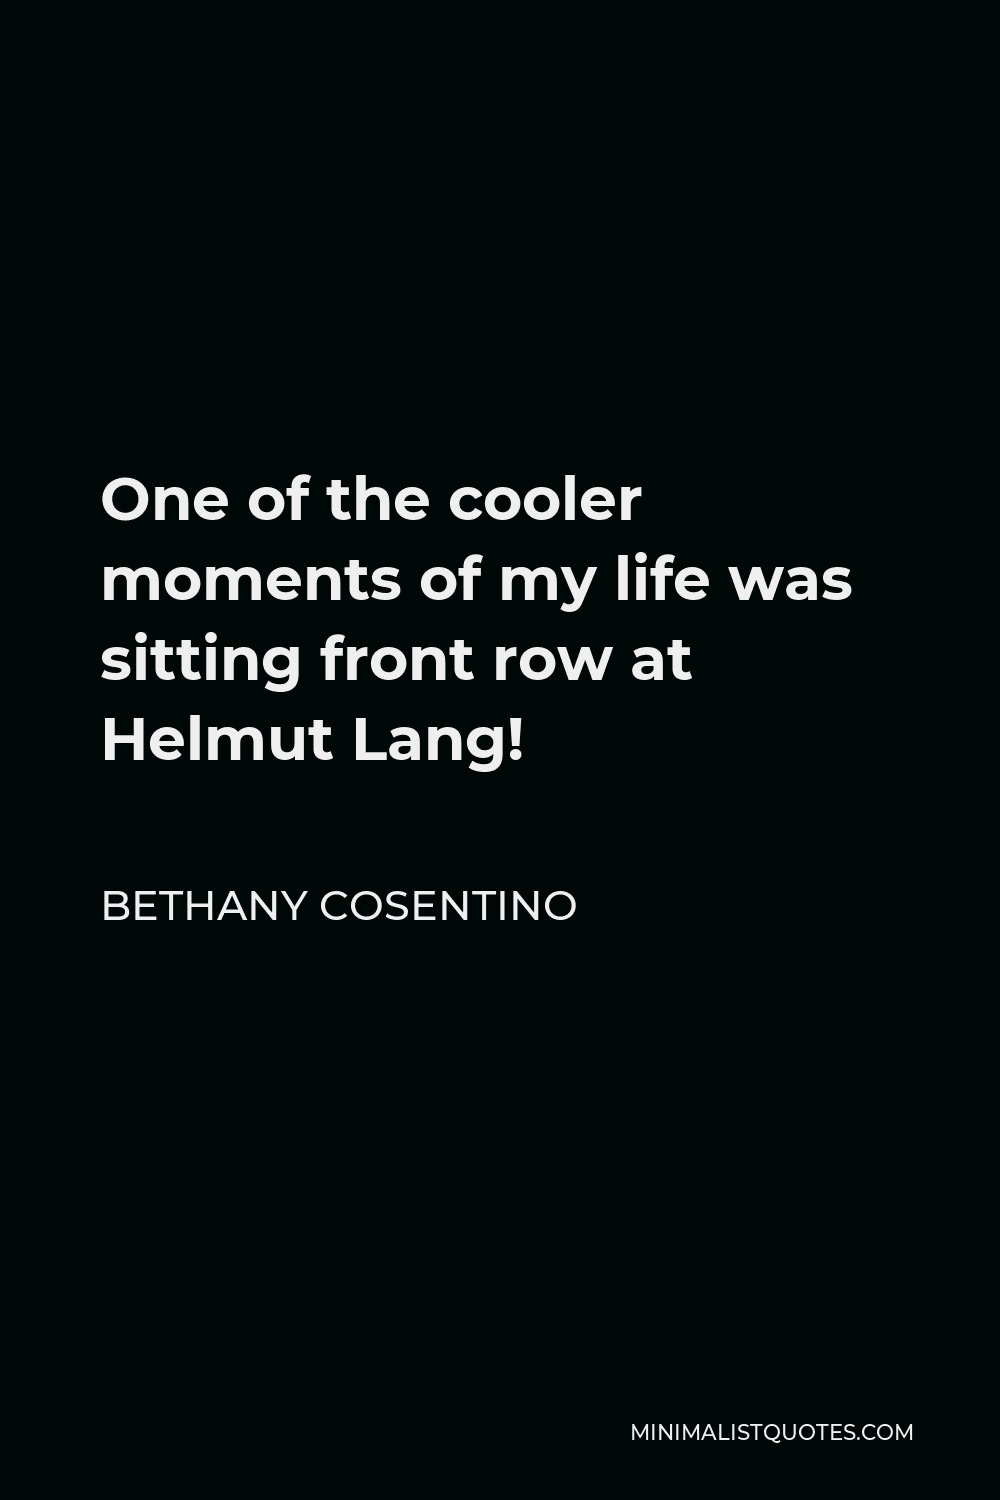 Bethany Cosentino Quote - One of the cooler moments of my life was sitting front row at Helmut Lang!